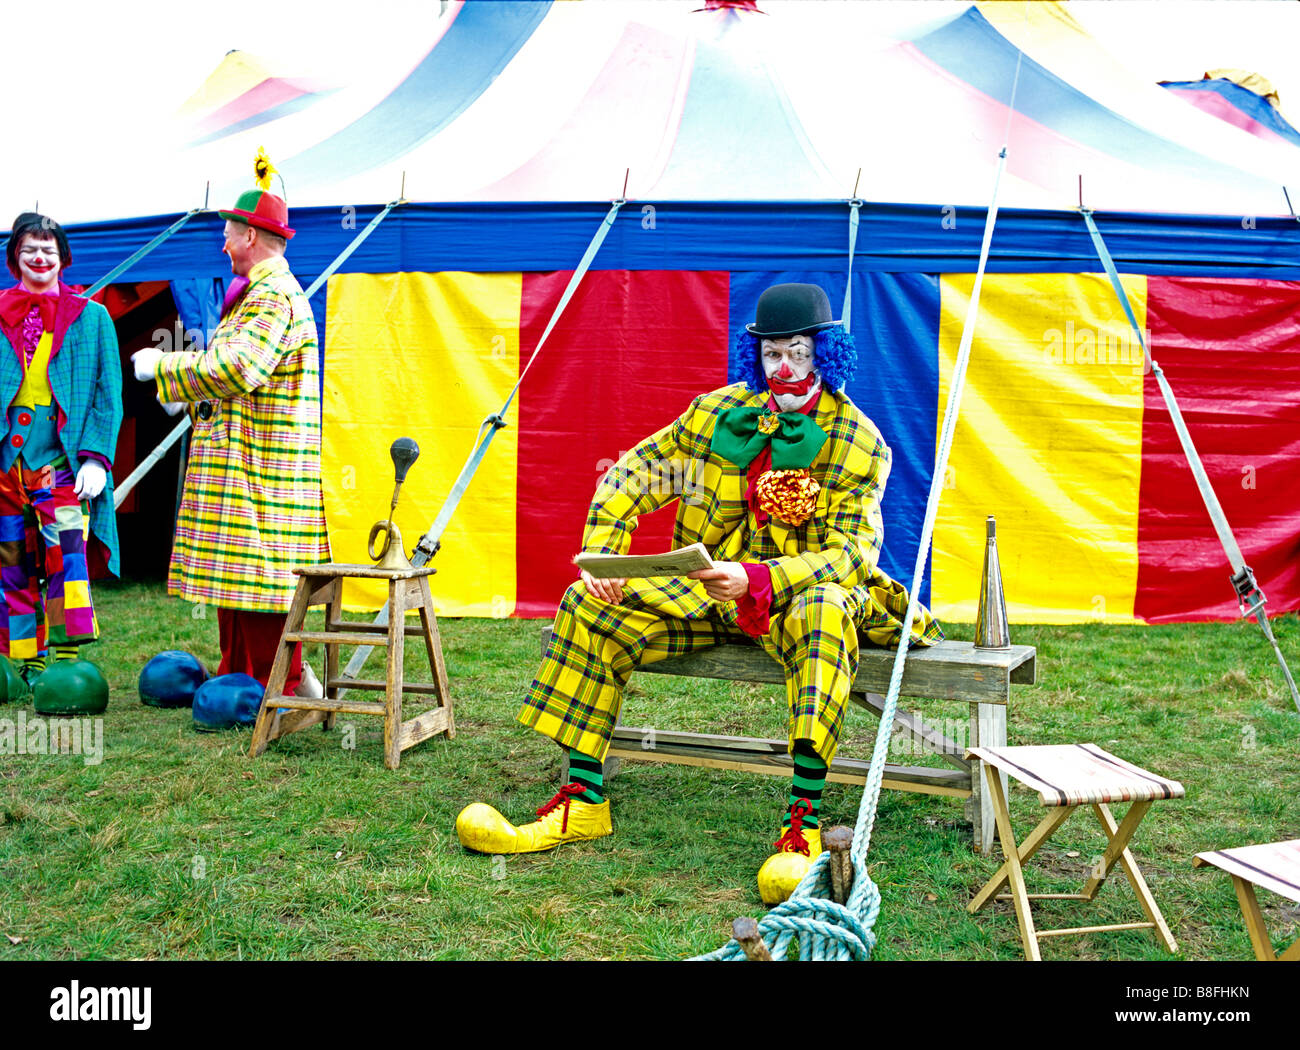 Clowns in front of circus tent Stock Photo